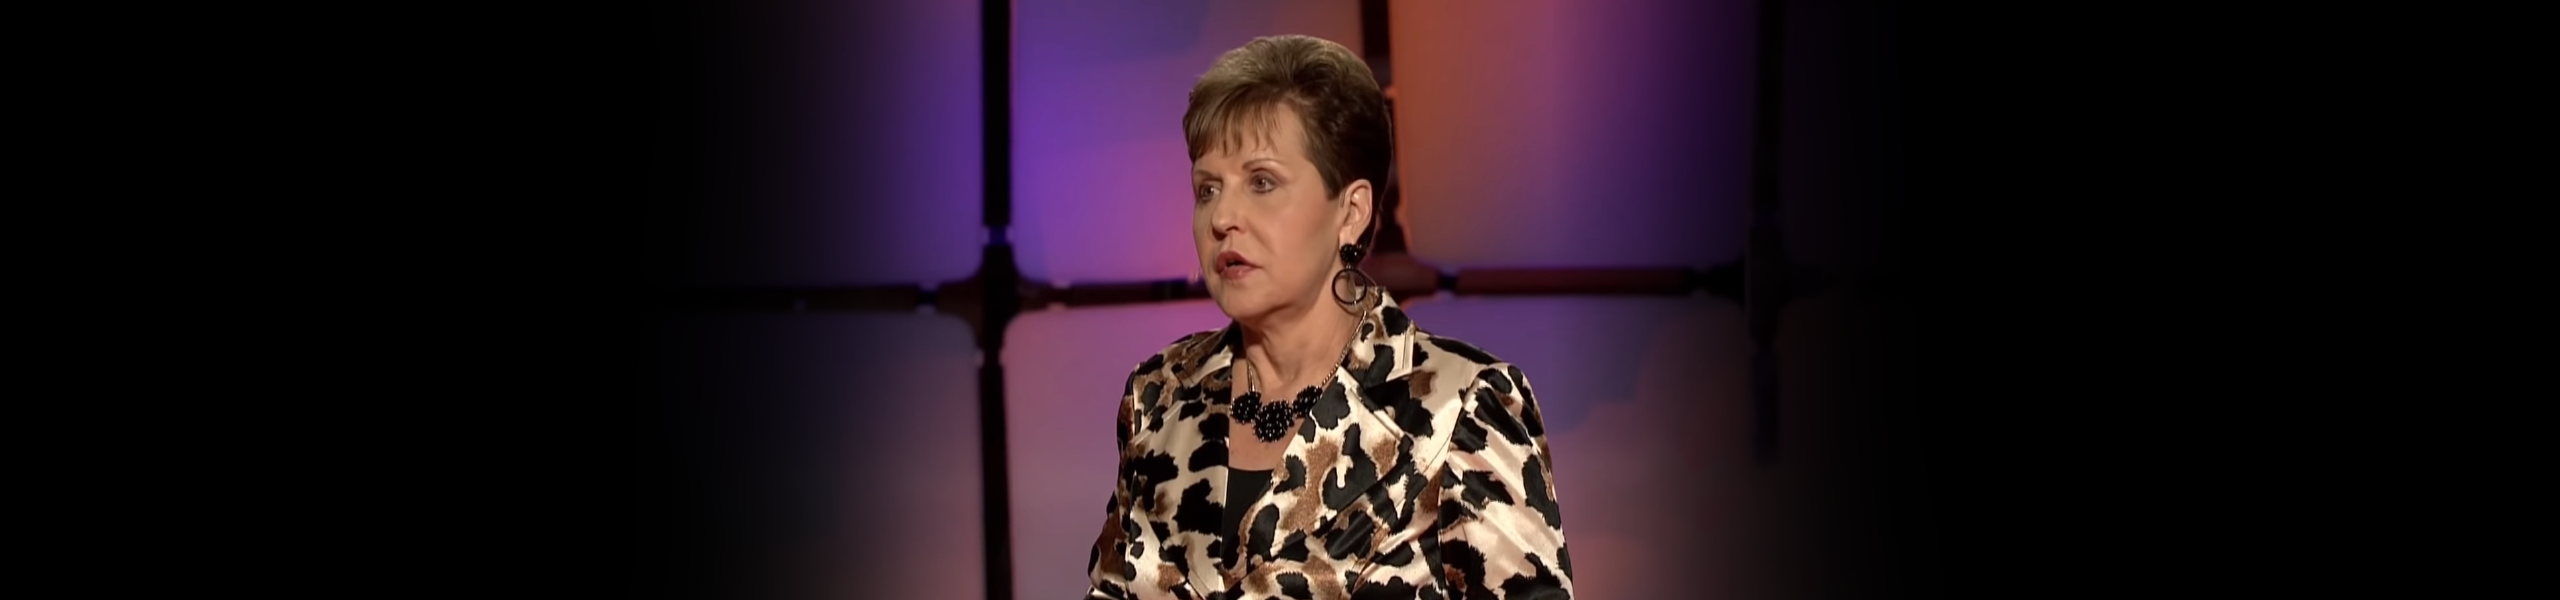 One Minute Message from Joyce Meyer